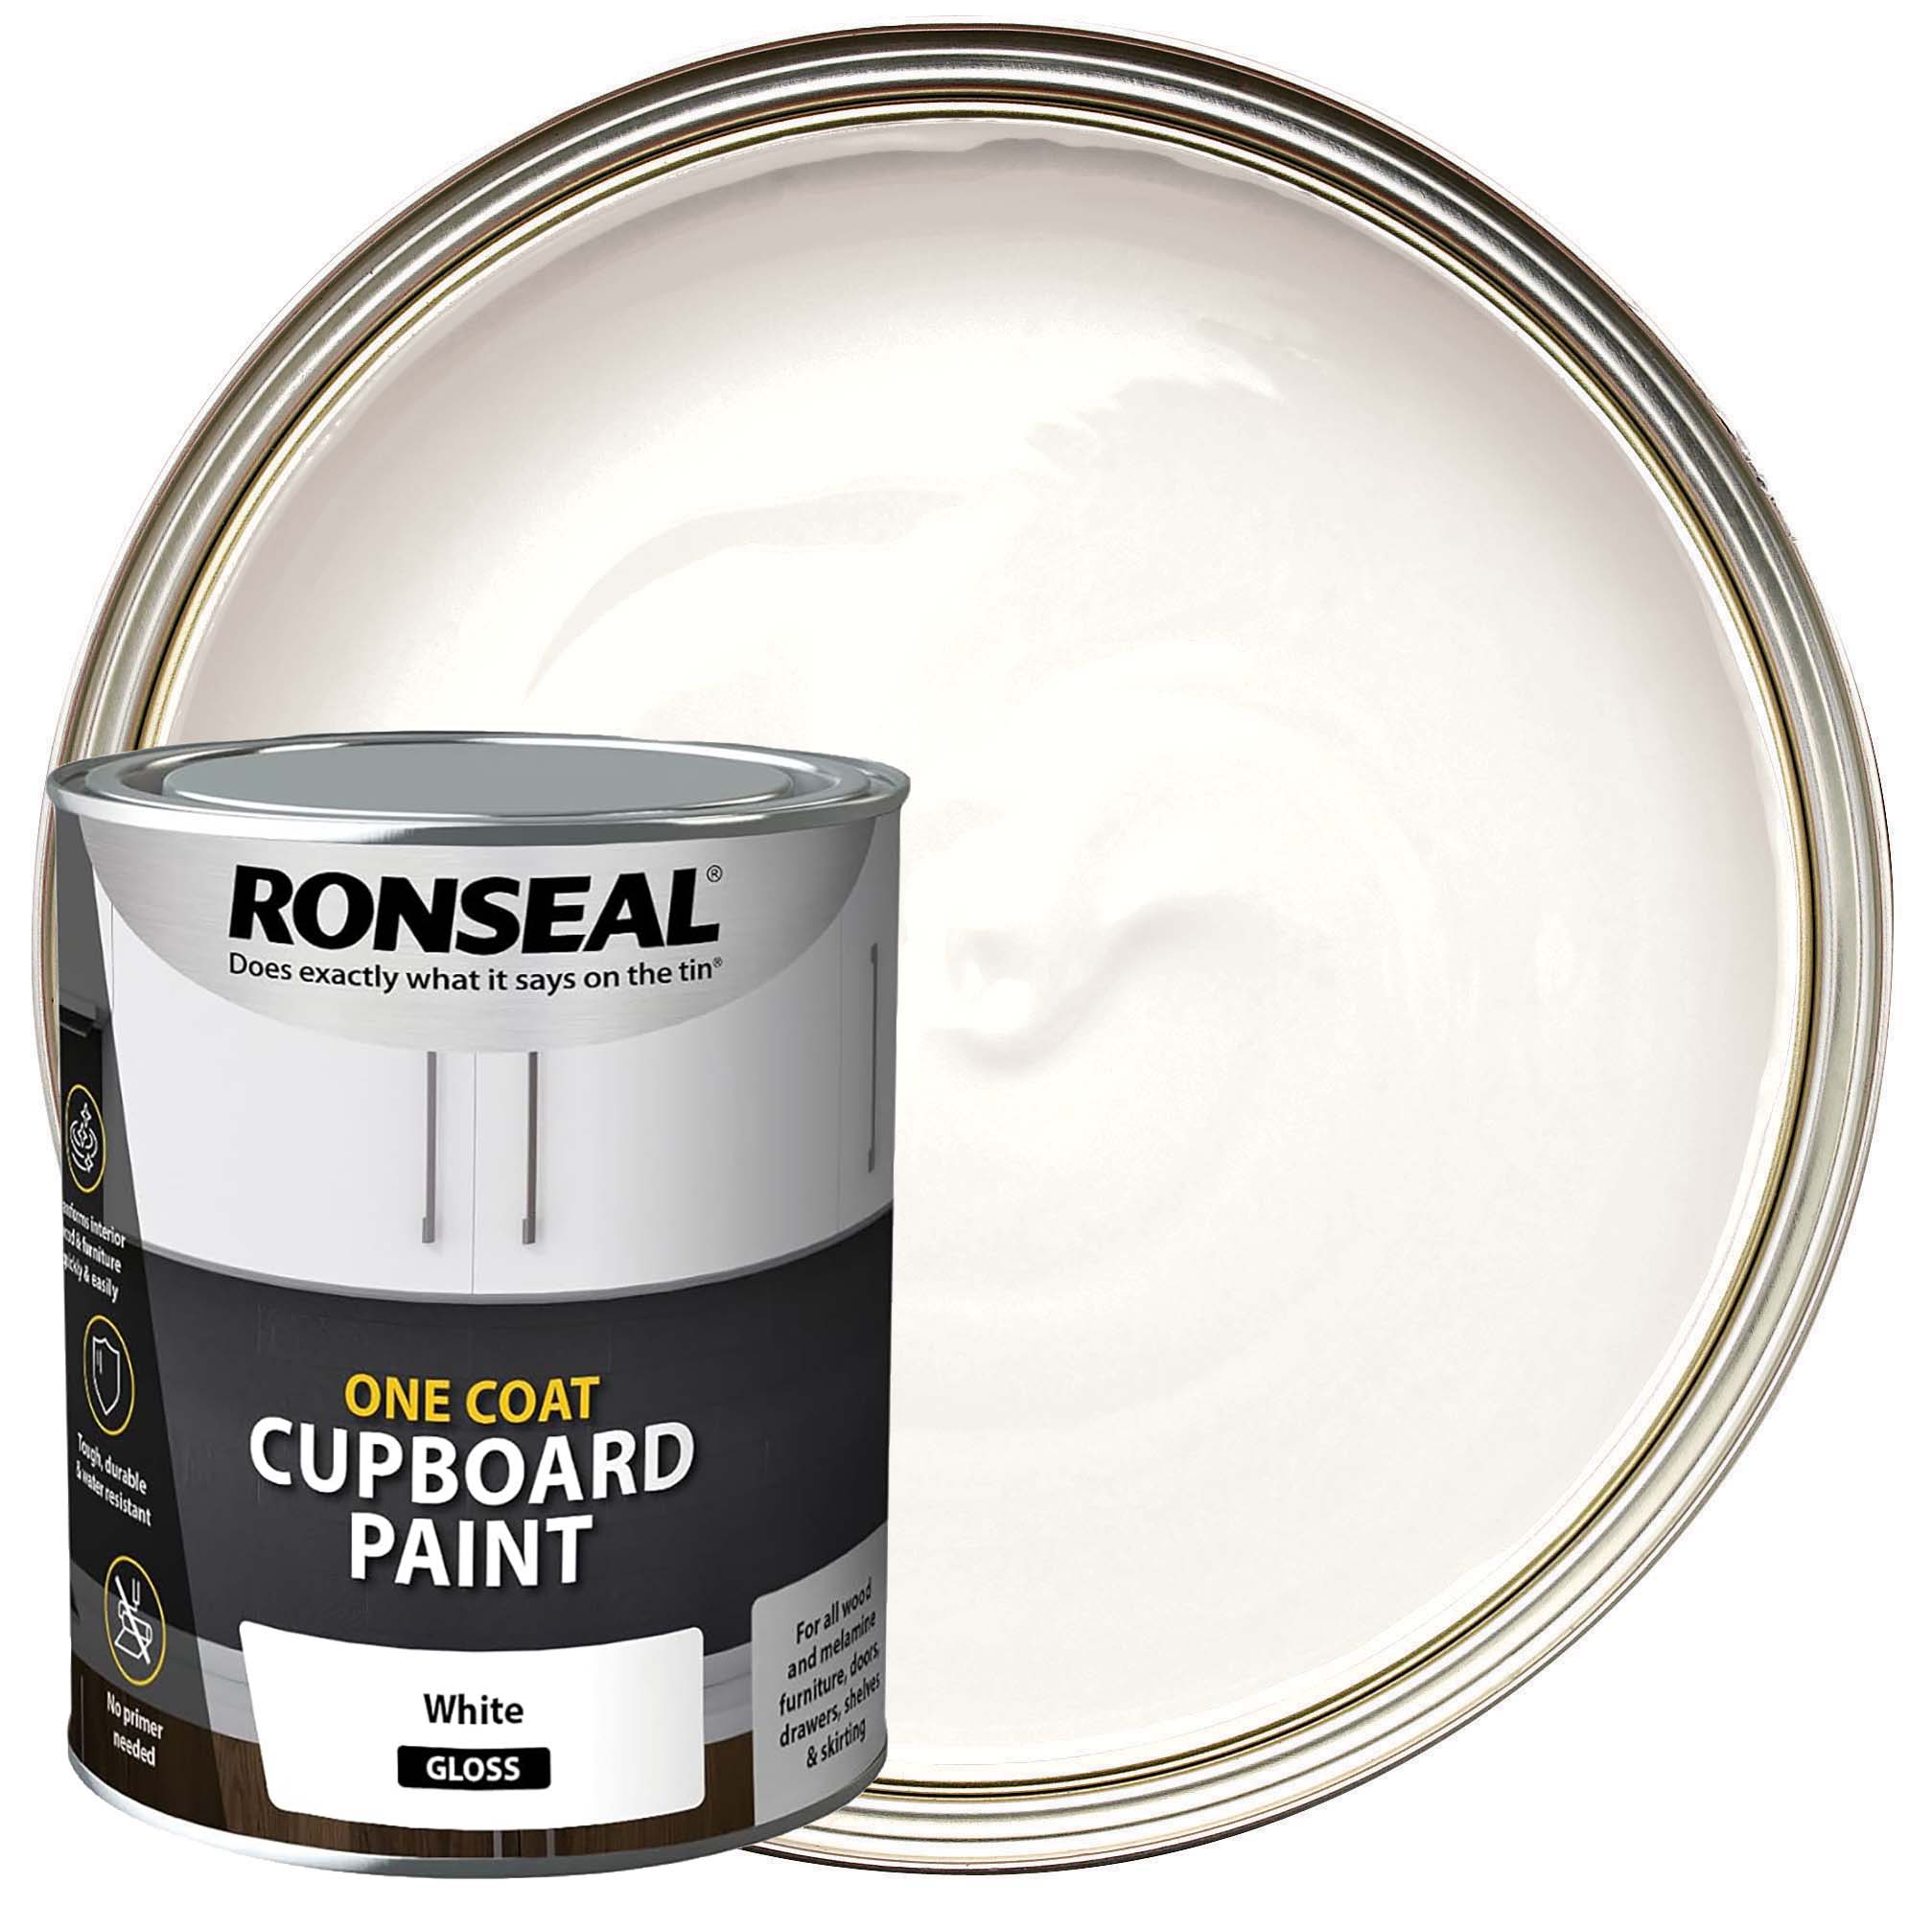 Ronseal One Coat Gloss Cupboard & Furniture Paint - White - 750ml